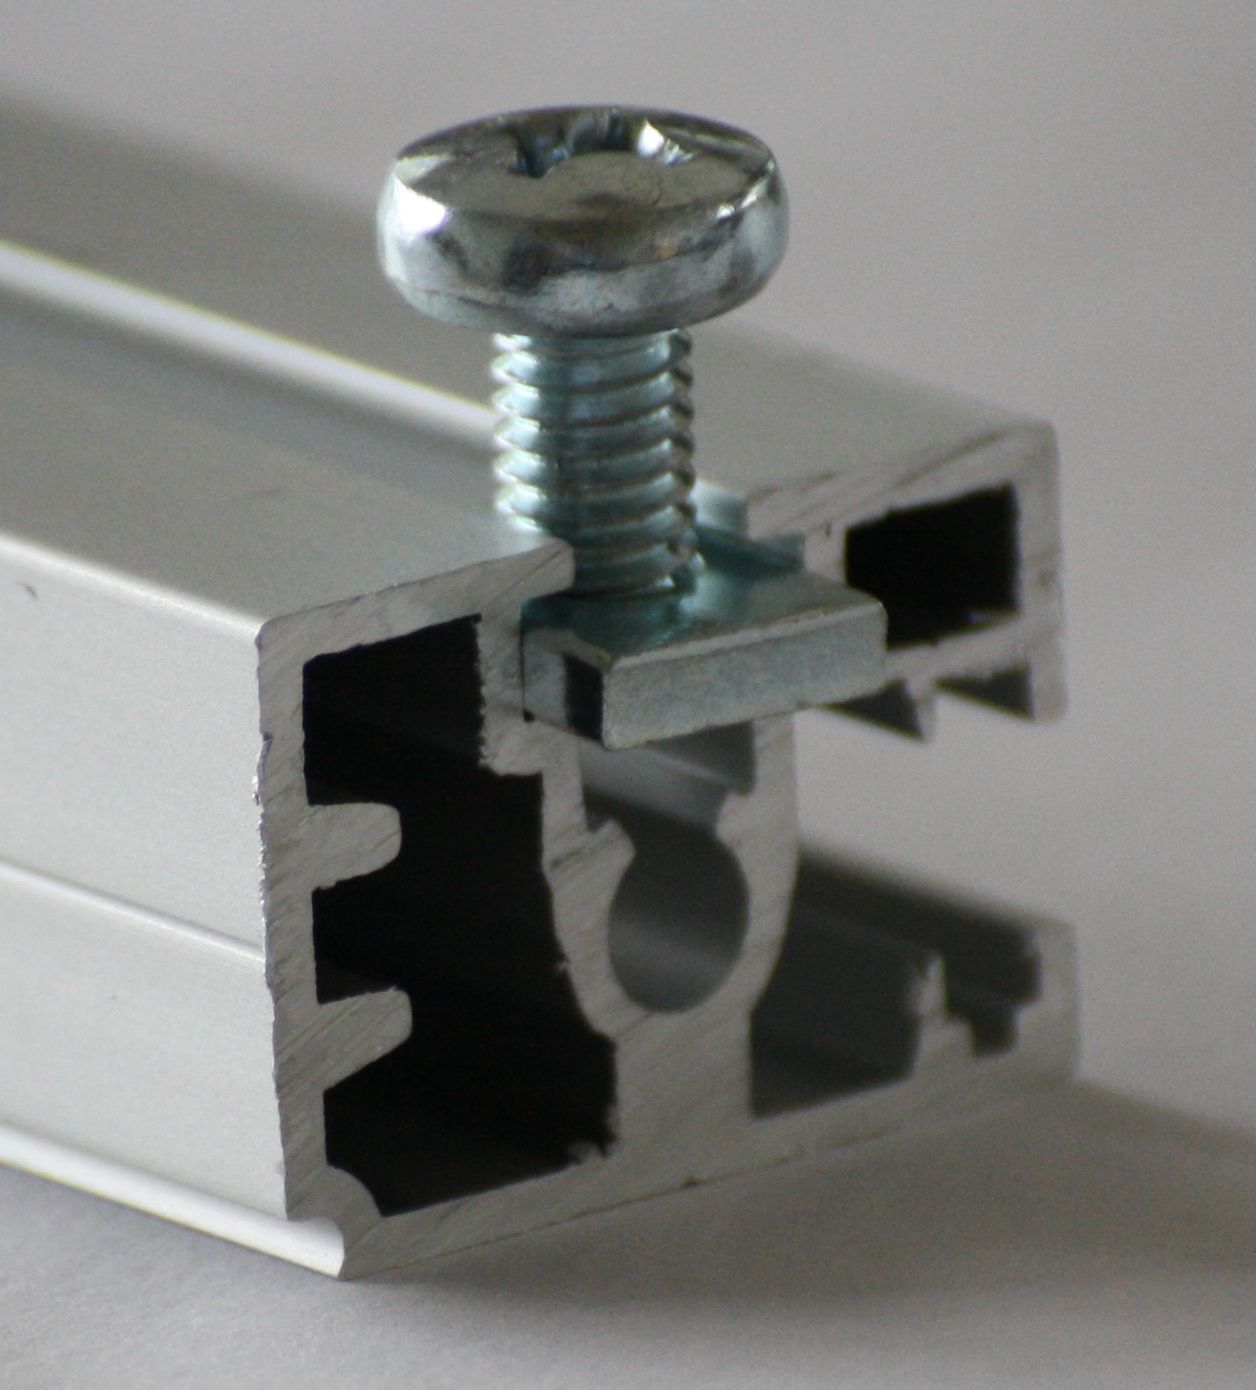 Universal clamping rail - fixed length